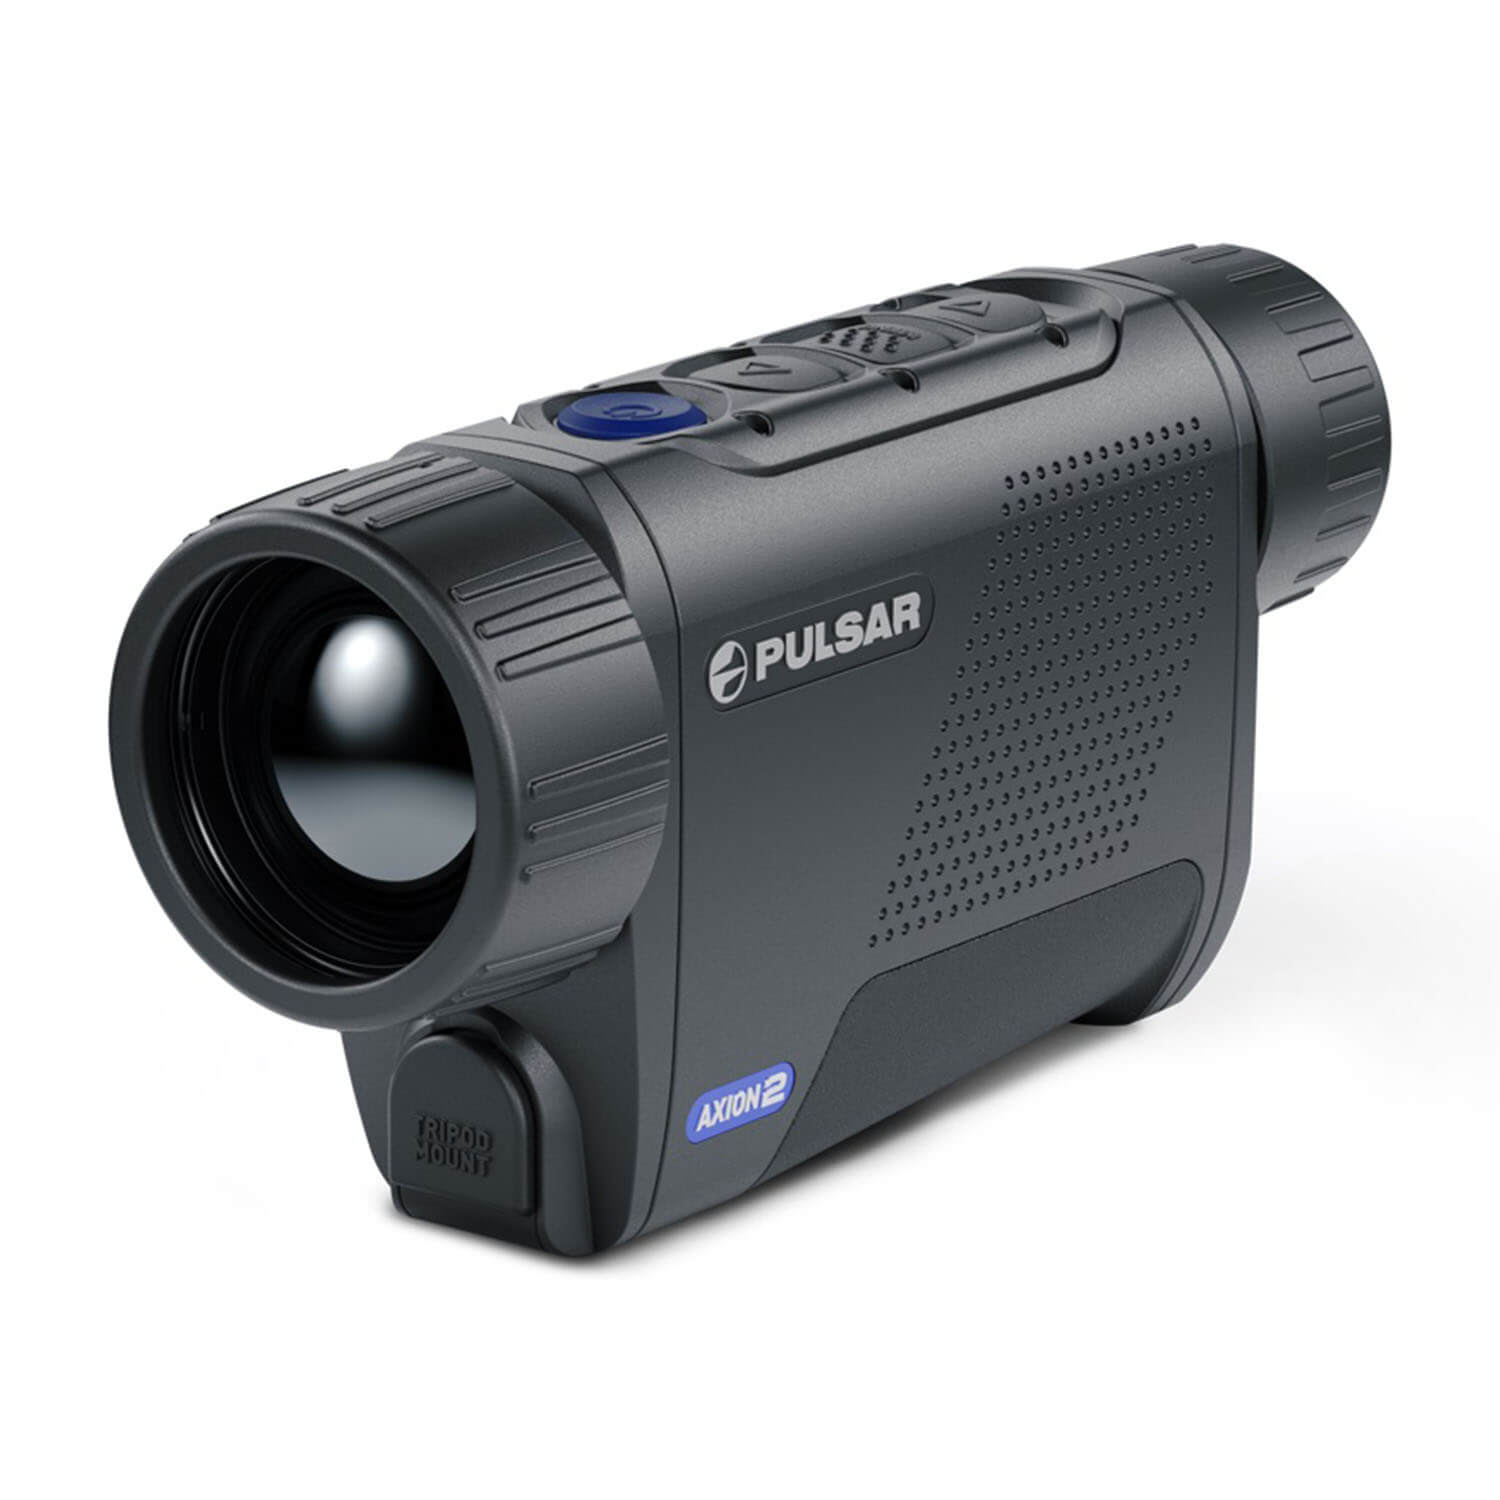 Pulsar thermal imaging device Axion 2 XG35 - Night Vision Devices